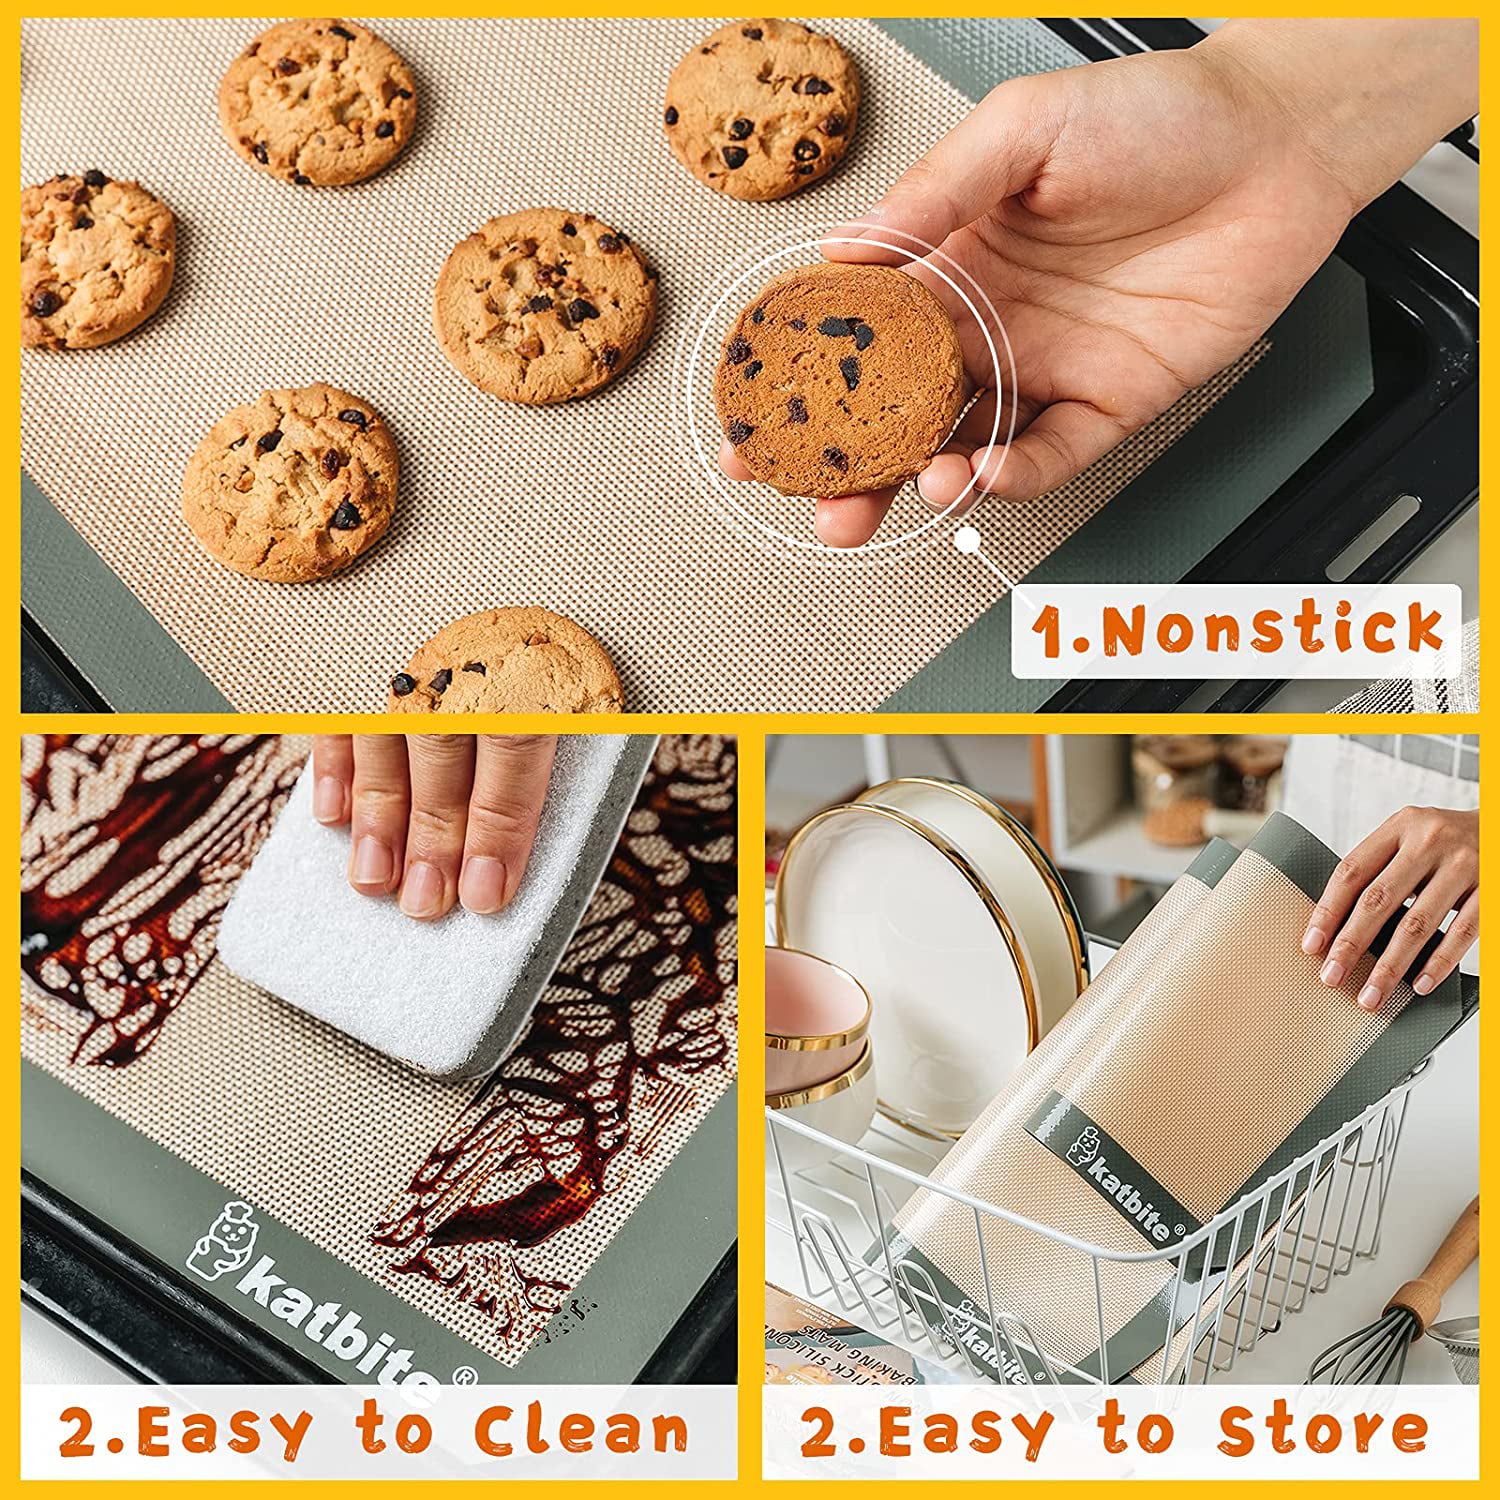 The Best Way to Store Silicone Baking Mats